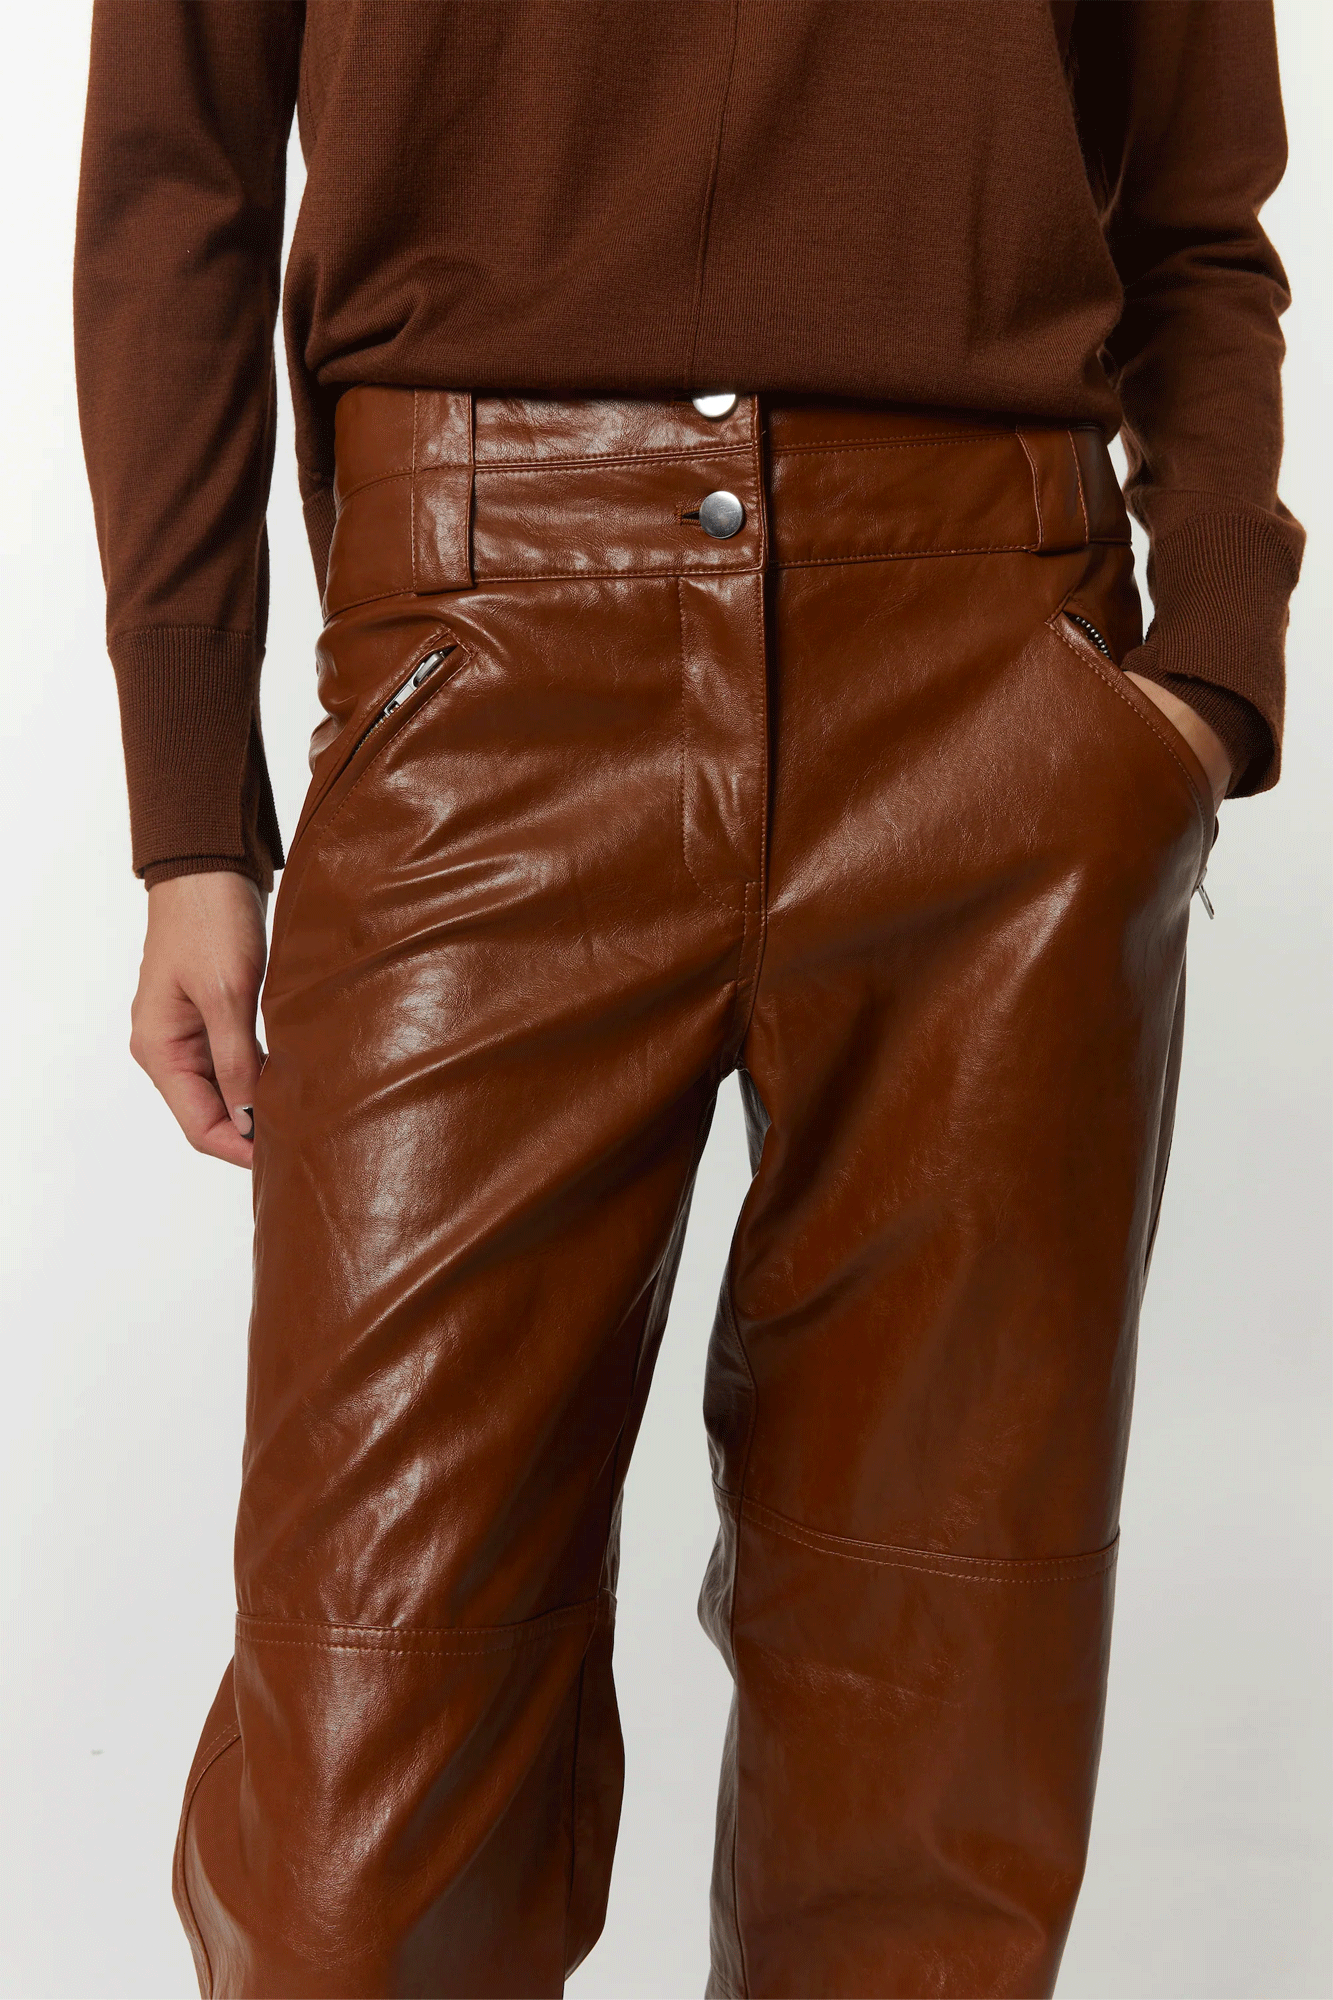 Our Lauren Leather Pant from Saint Art is the perfect addition to your closet! Crafted from high-quality vegan leather, these low rise straight leg trousers will give you an edgy yet sophisticated look. Durable front zip pockets and snap jean buttons add the perfect streetwear flair. Make a statement with these super sleek and elevated trousers!